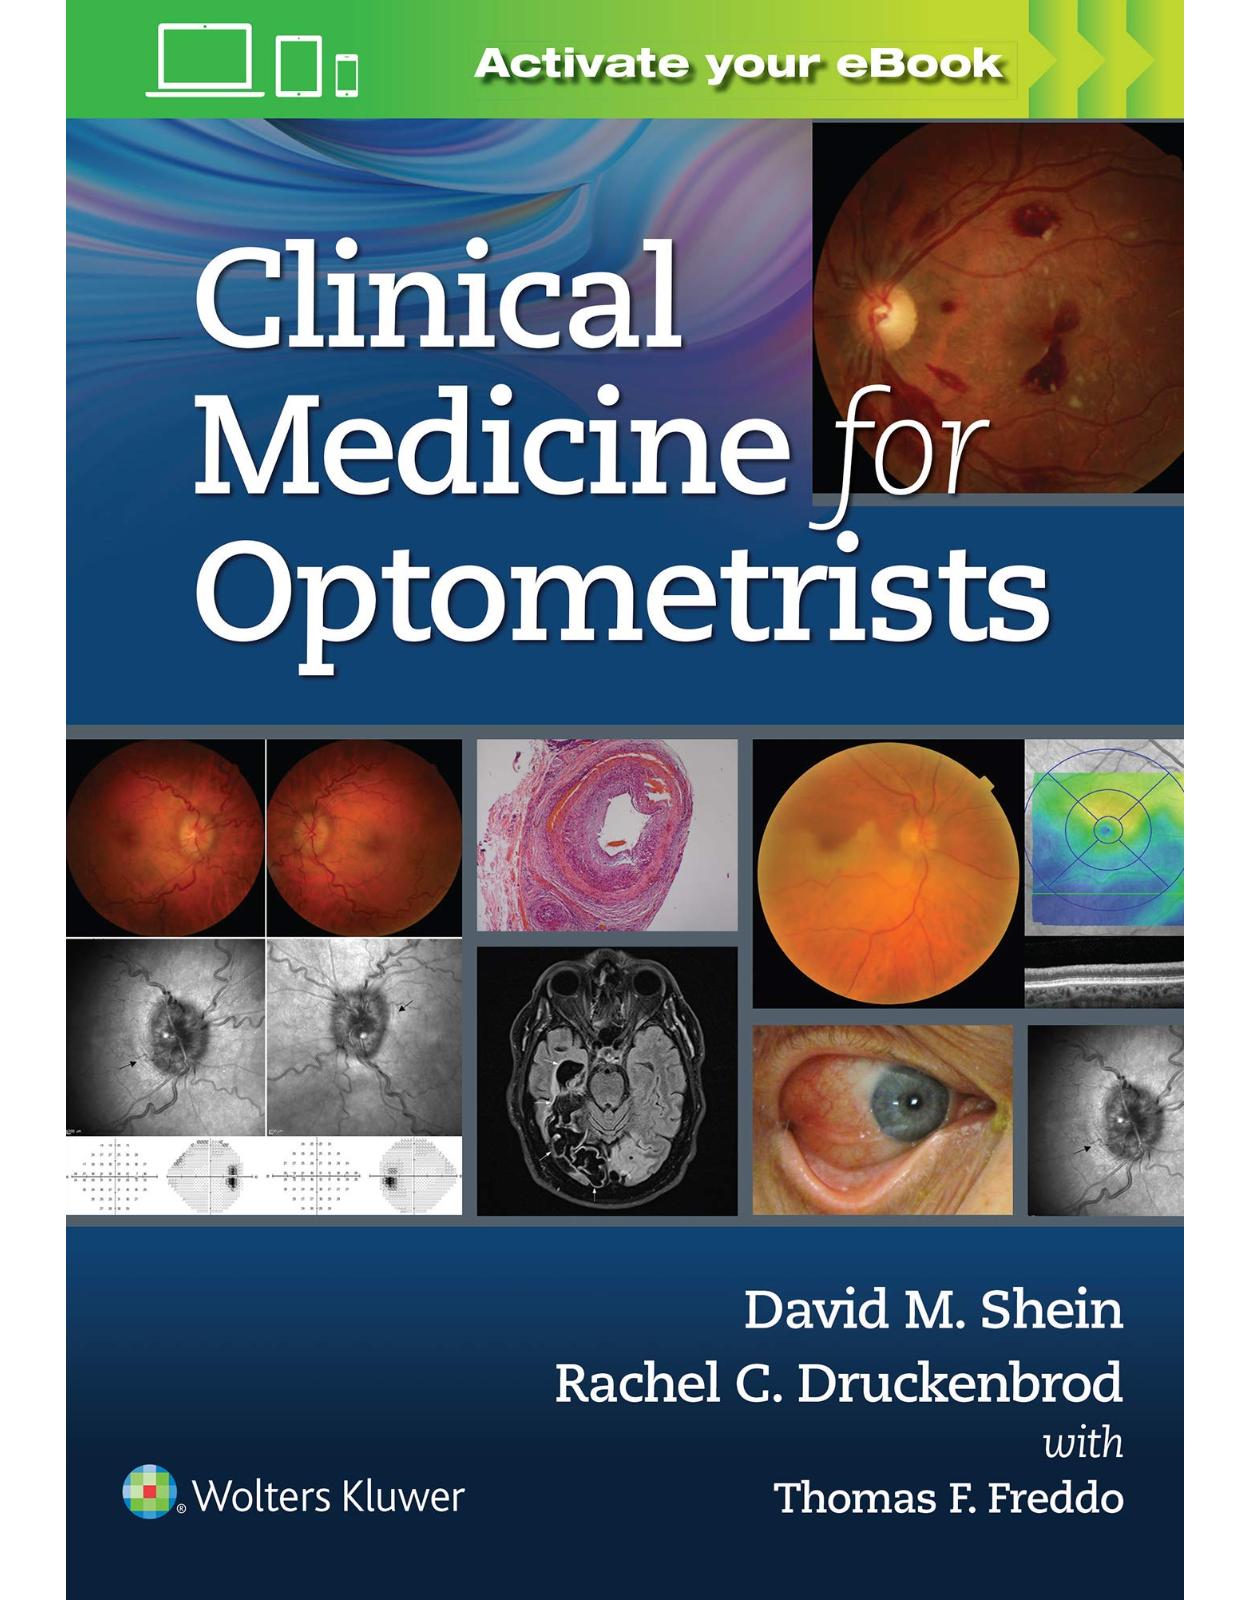 Clinical Medicine for Optometrists